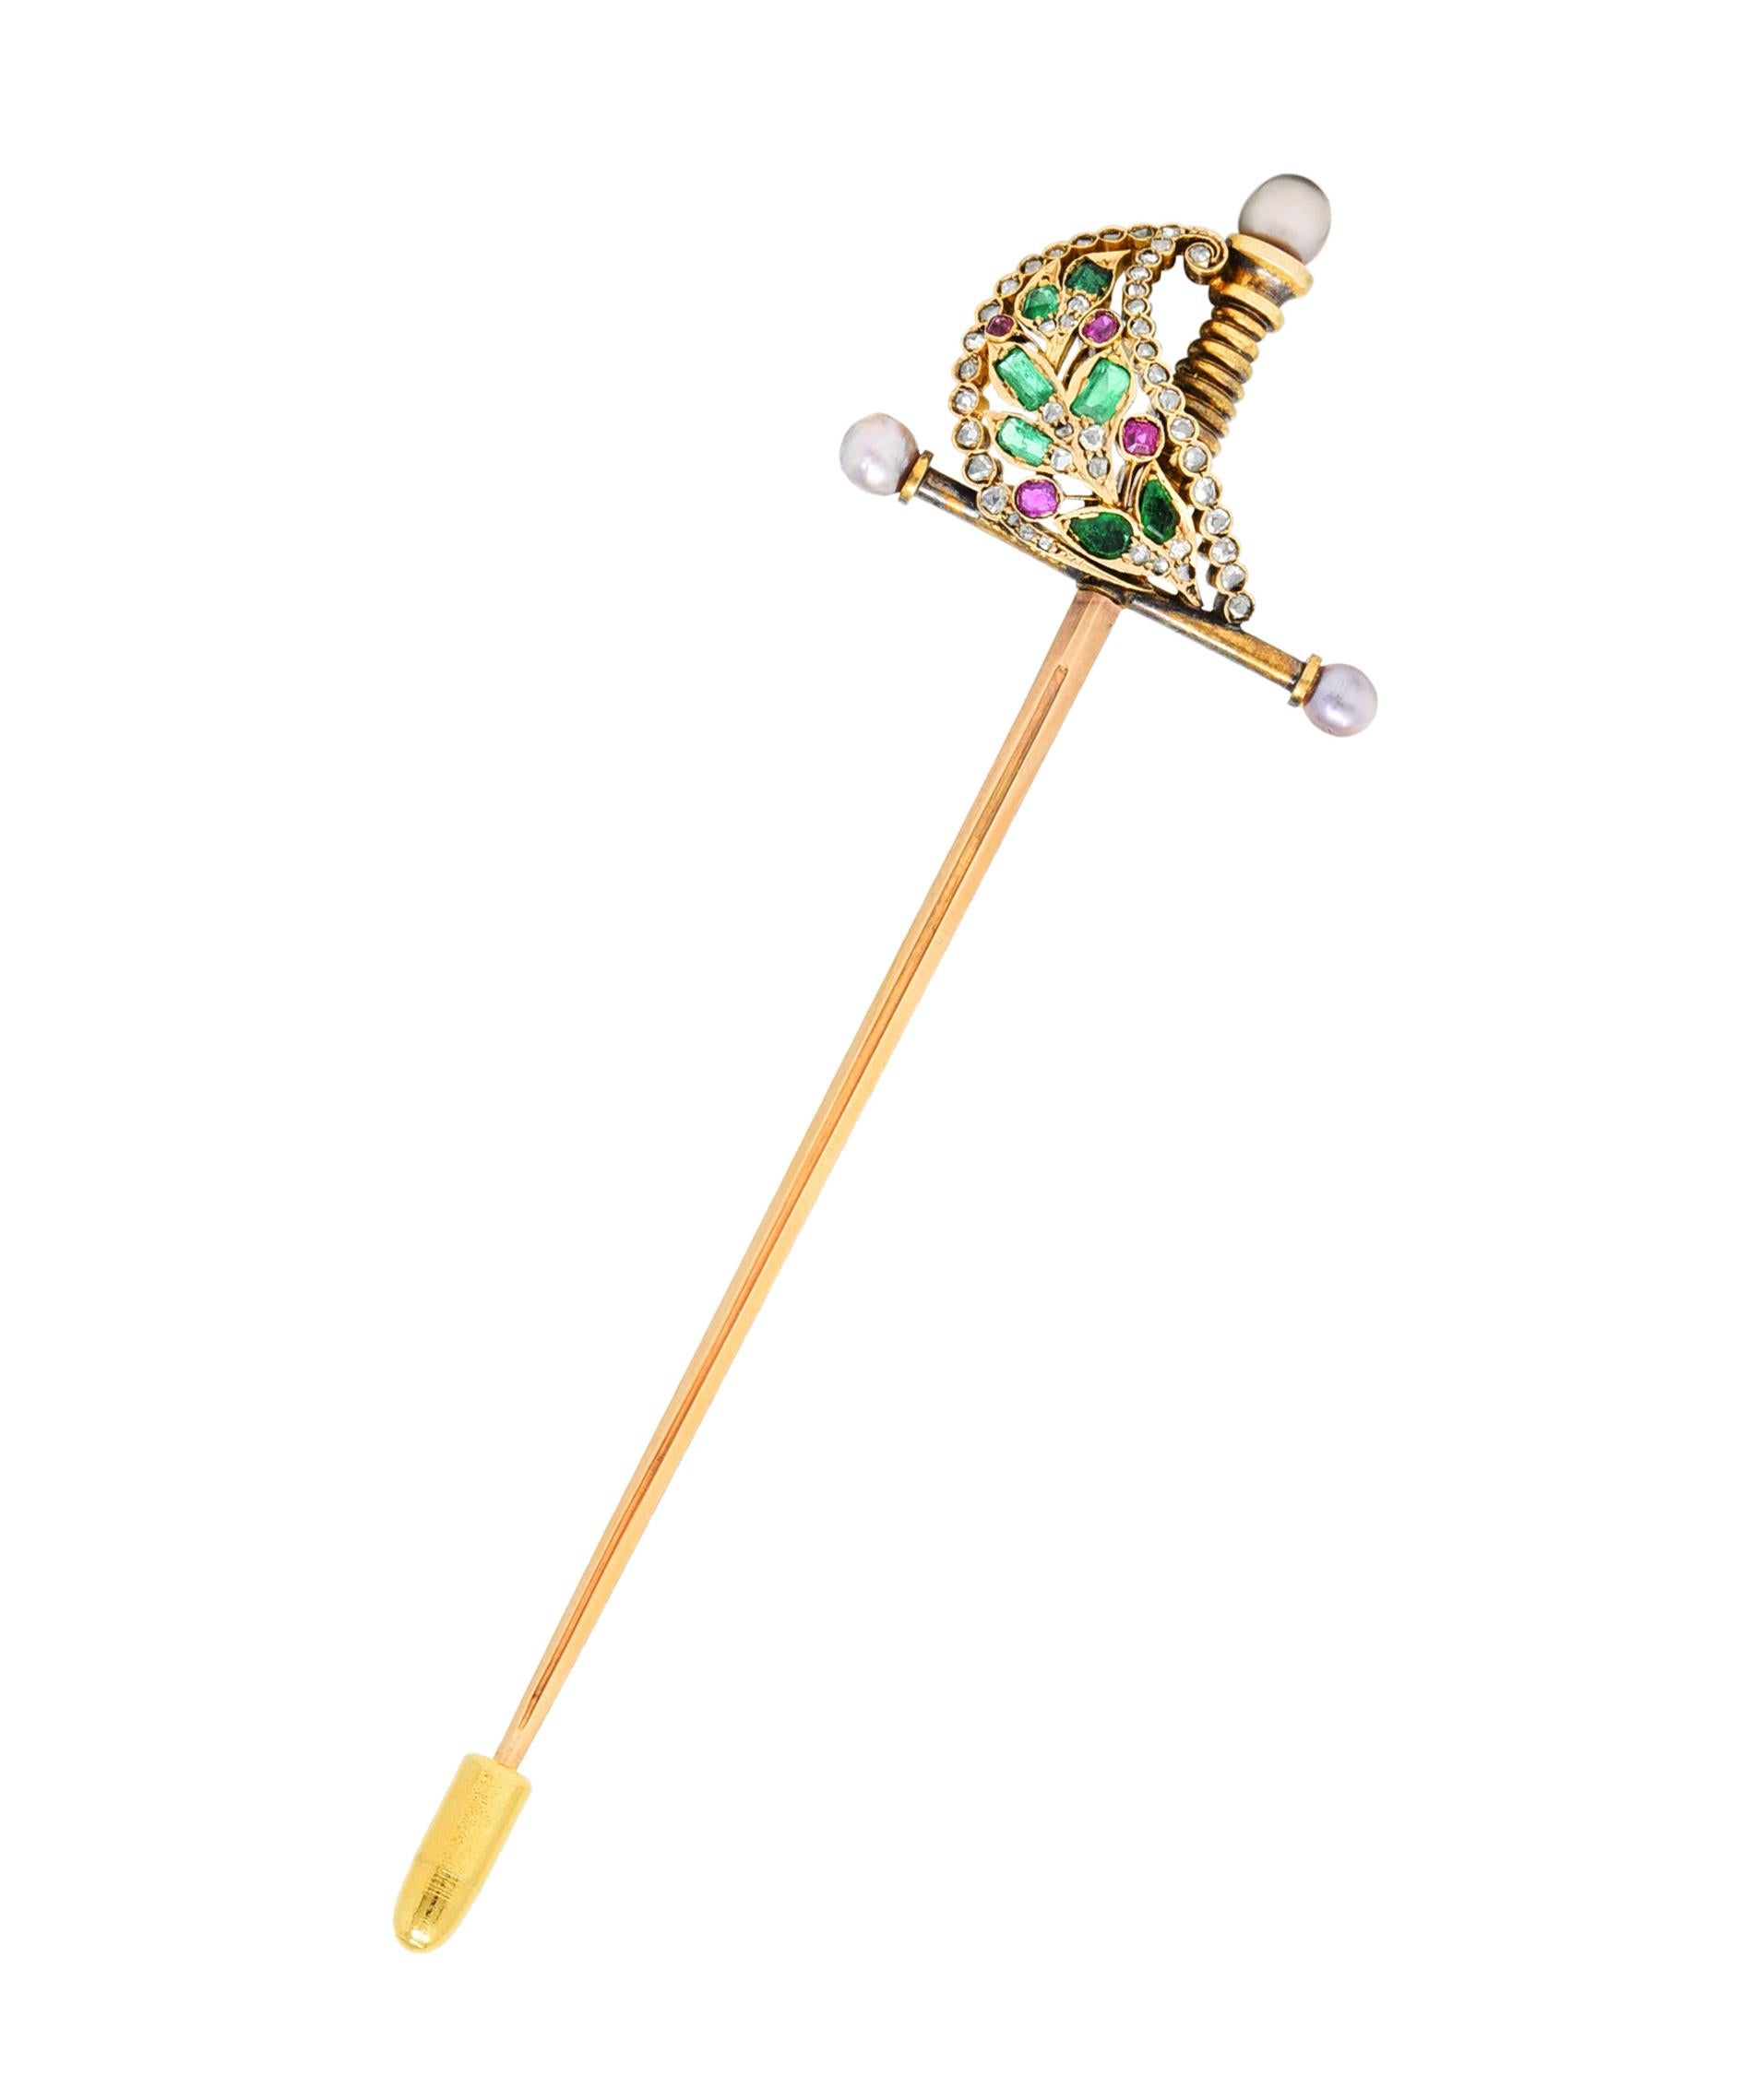 Designed as a sword with a decorative and gemmed hilt - tested as 18 karat gold

With rose cut diamonds, cushion cut rubies, and emeralds

Weighing in total approximately 1.25 carats

Hilt terminates as gray oval pearls - some with strong rosè